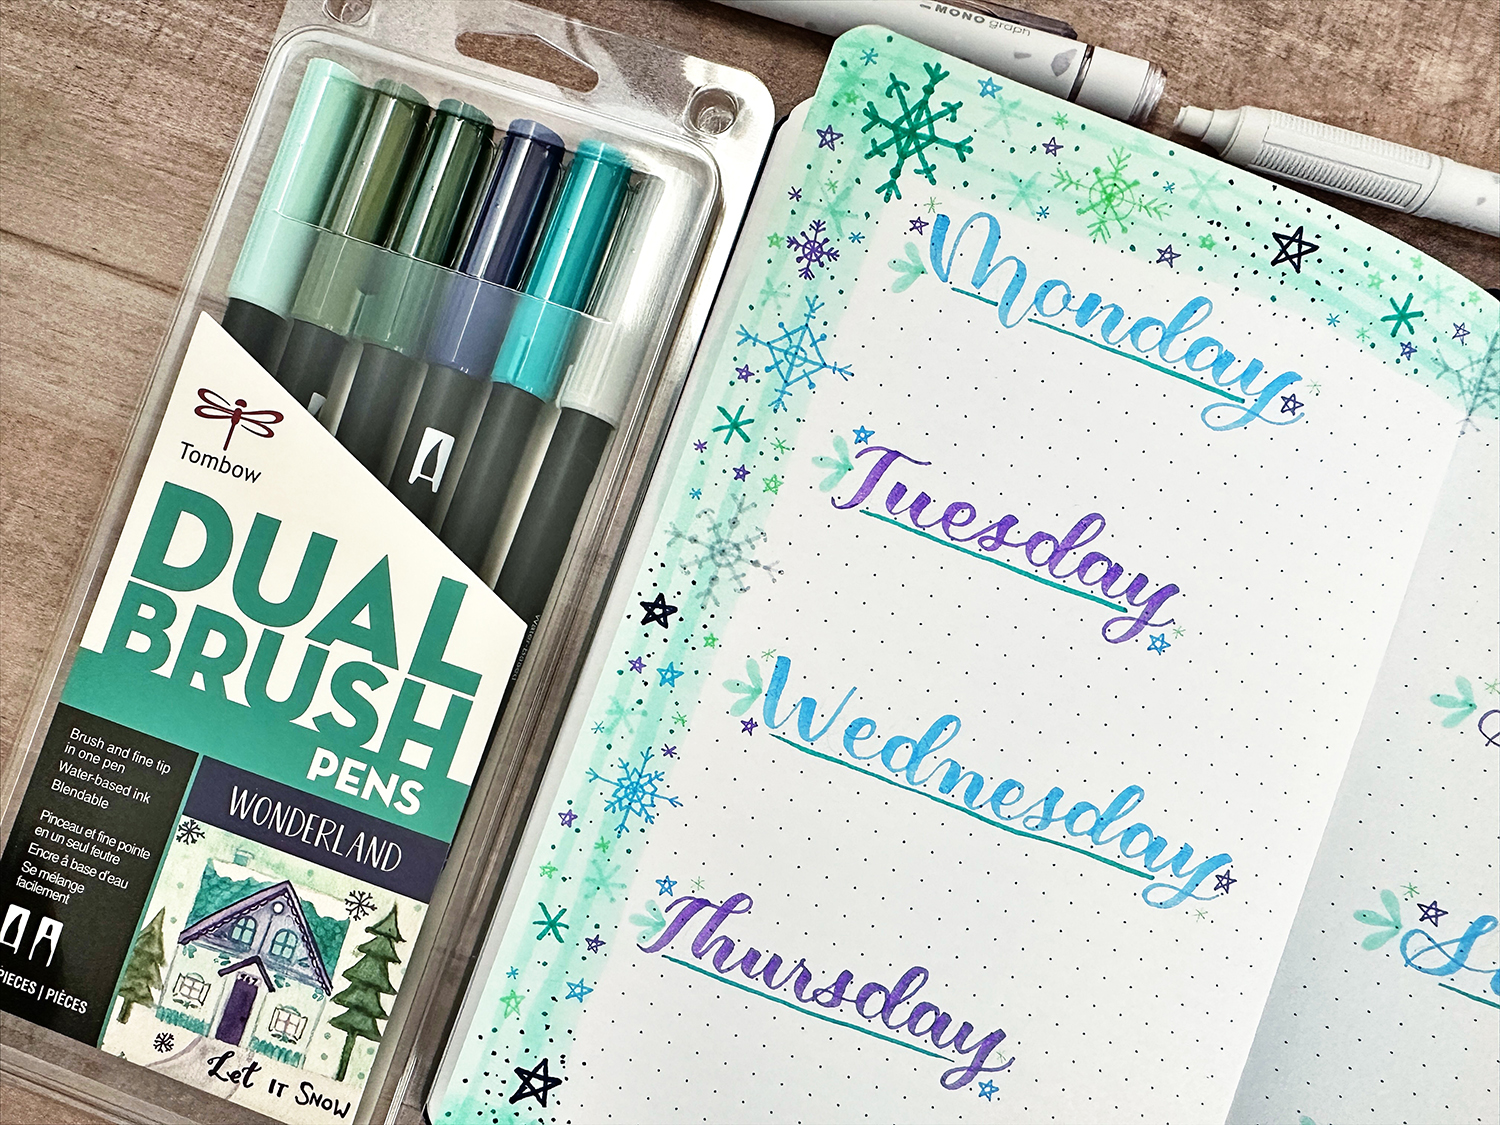 The Tombow Dual Brush Pens Wonderland Pack is perfect for the Winter Season! You can use it for lettering, water coloring, and journaling. #tombow #journaling